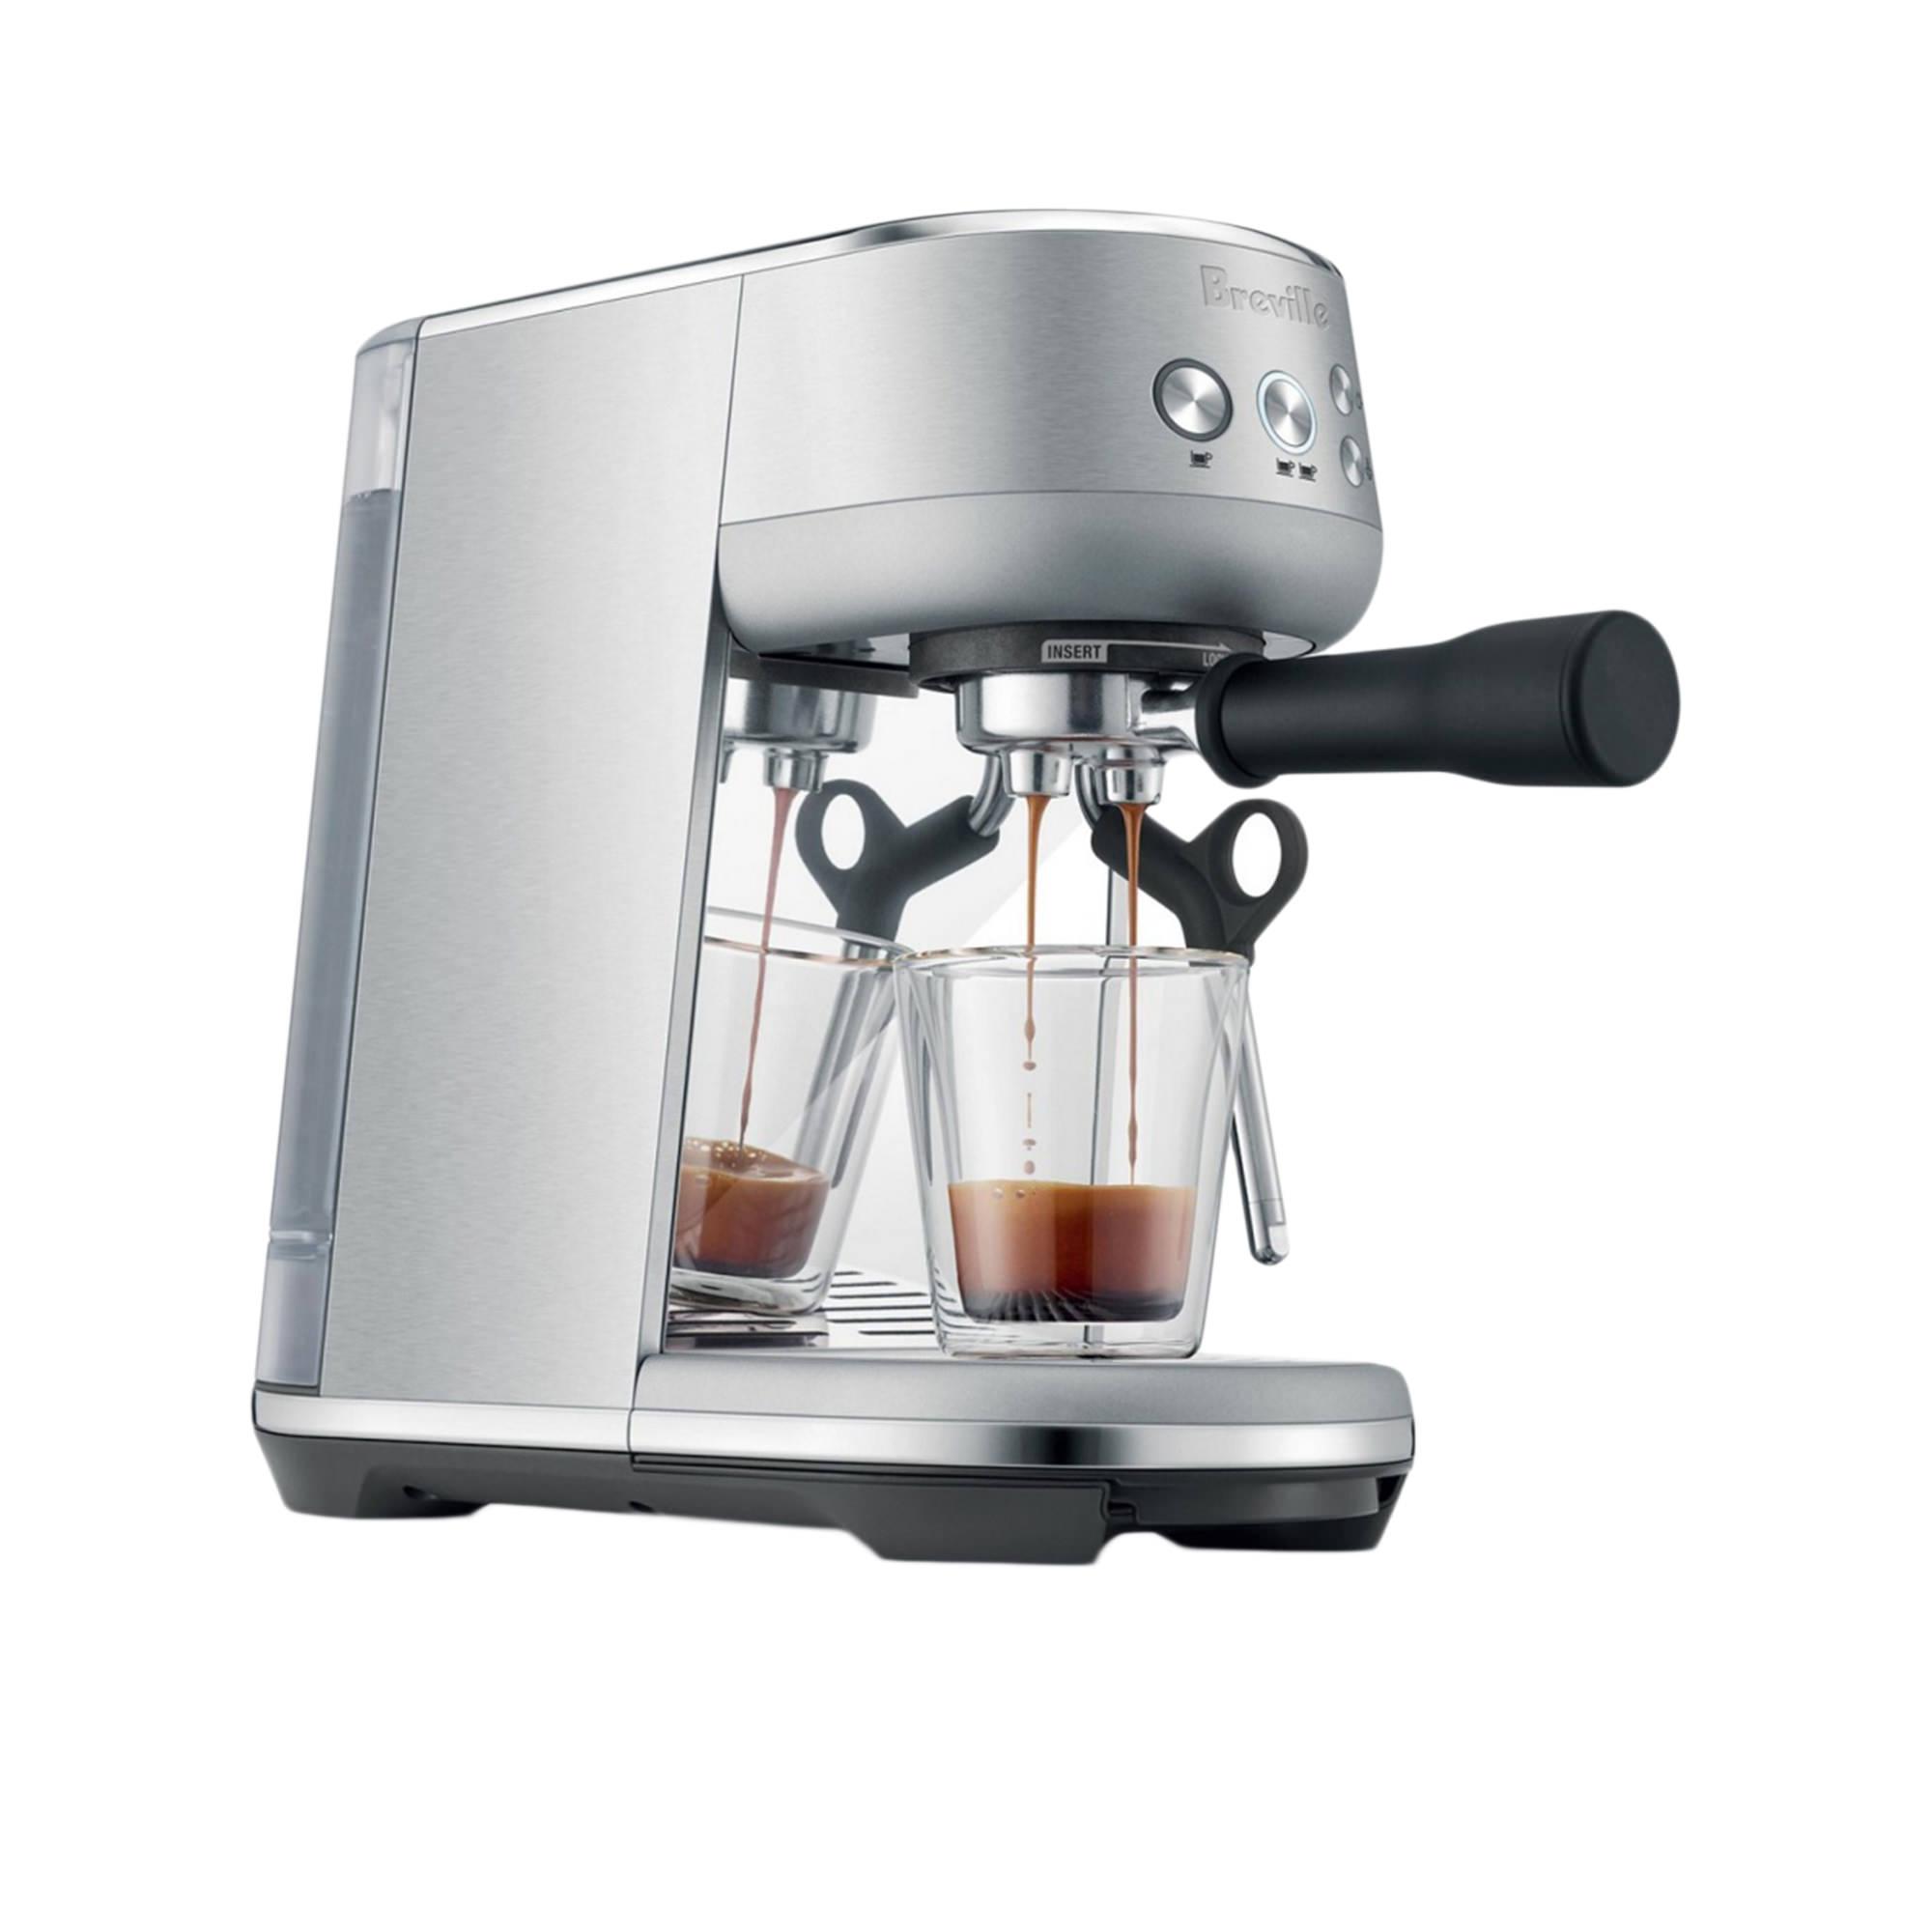 Breville The Bambino Espresso Machine Brushed Stainless Steel Image 3